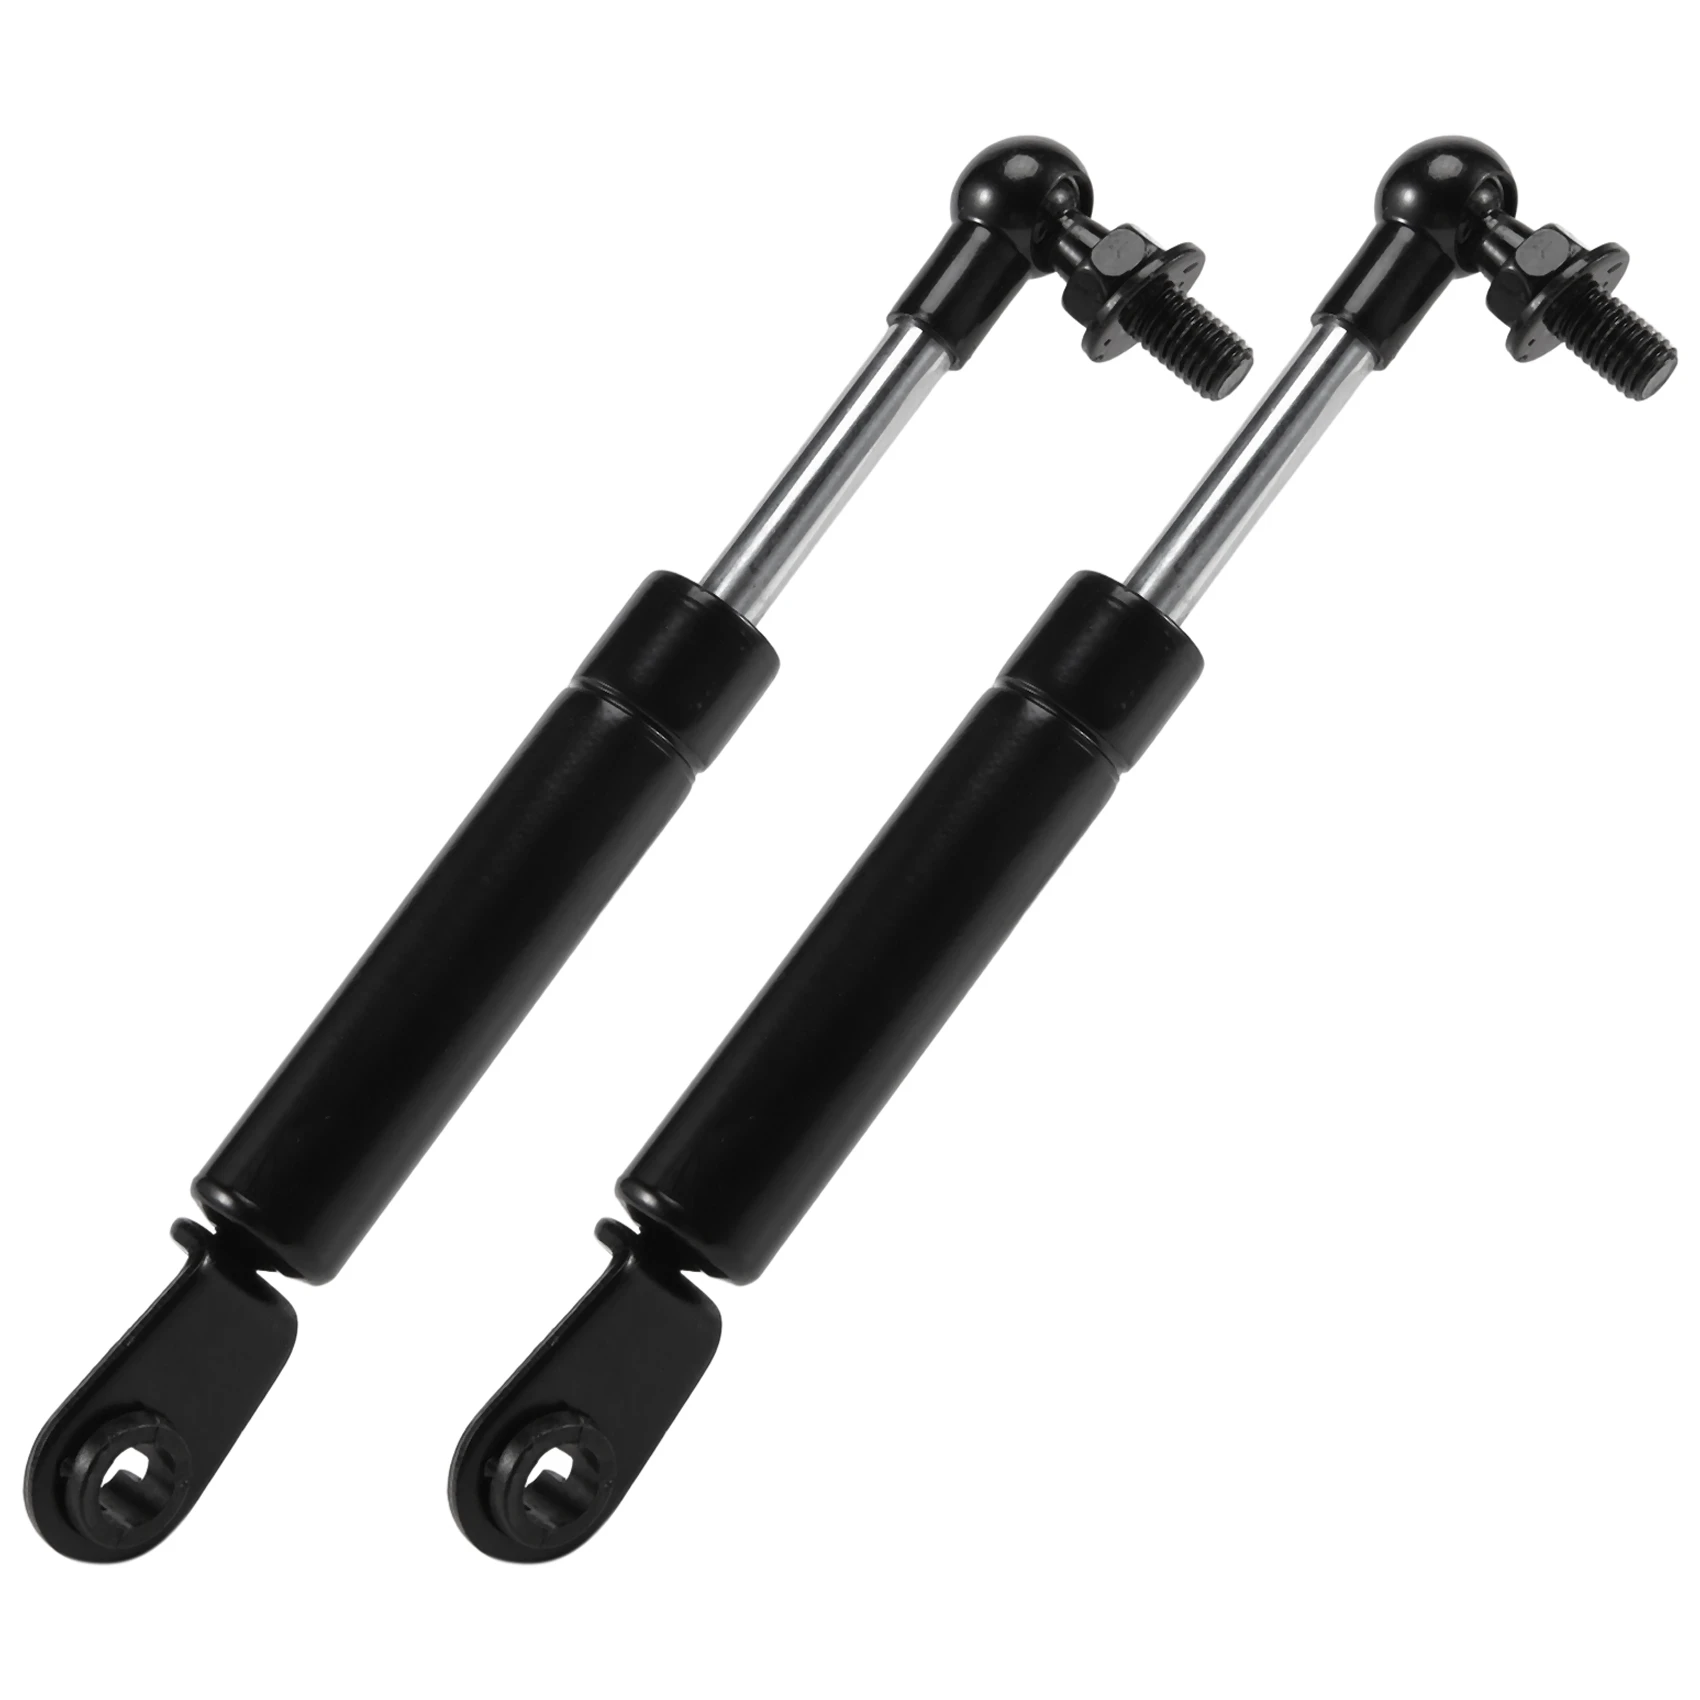 

Struts Arms Lift Supports for Yamaha T MAX 530 2012-2018 T-MAX 500 2008-2018 Shock Absorbers Lift Seat Accessories